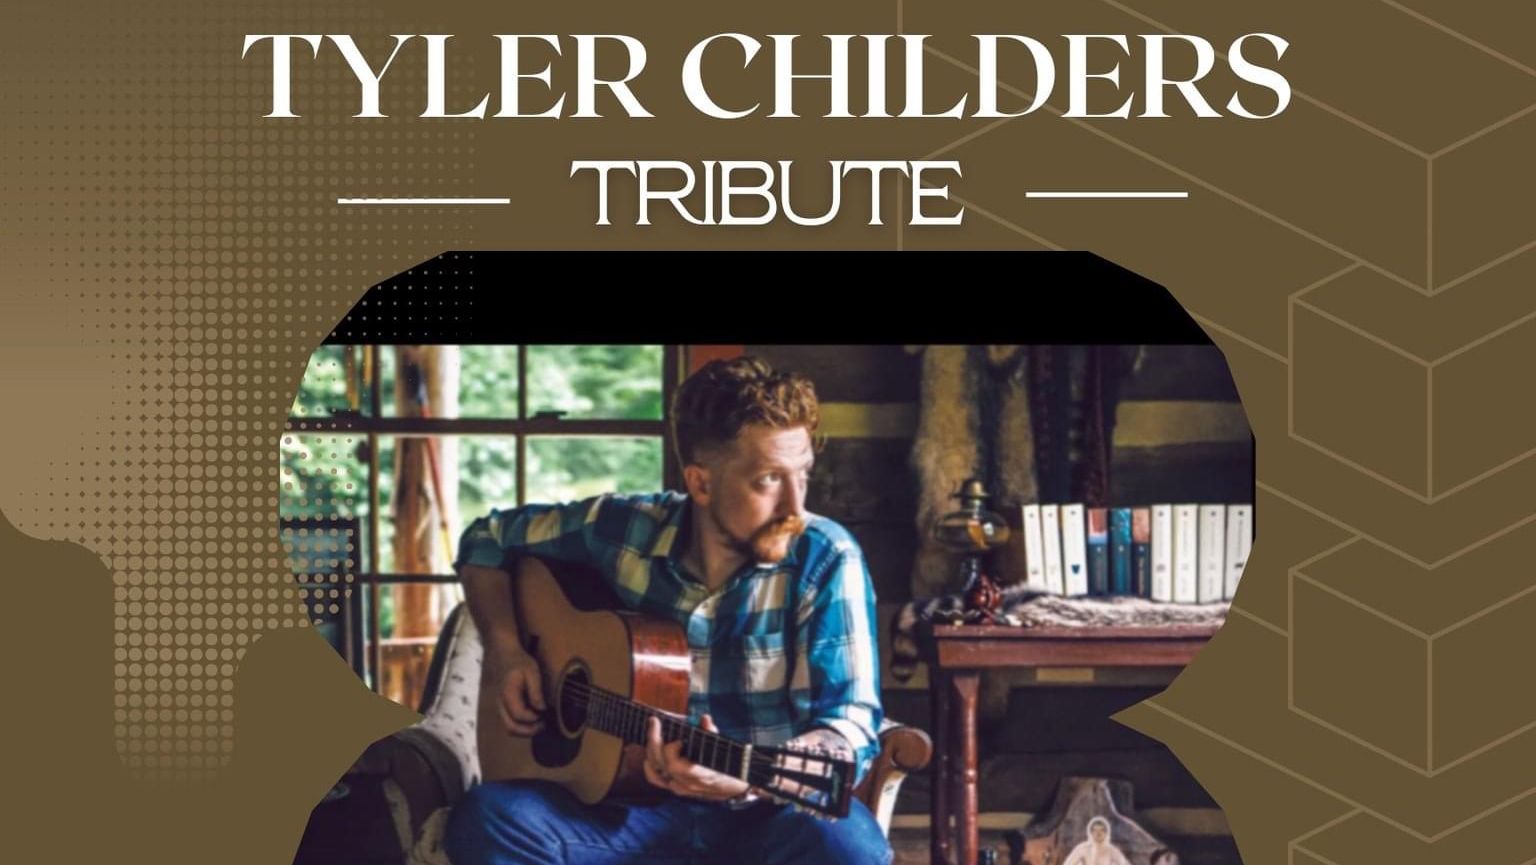 Tyler Childers Tribute w/ The Hounds - February 16th - $30 - Doors 6:30 PM